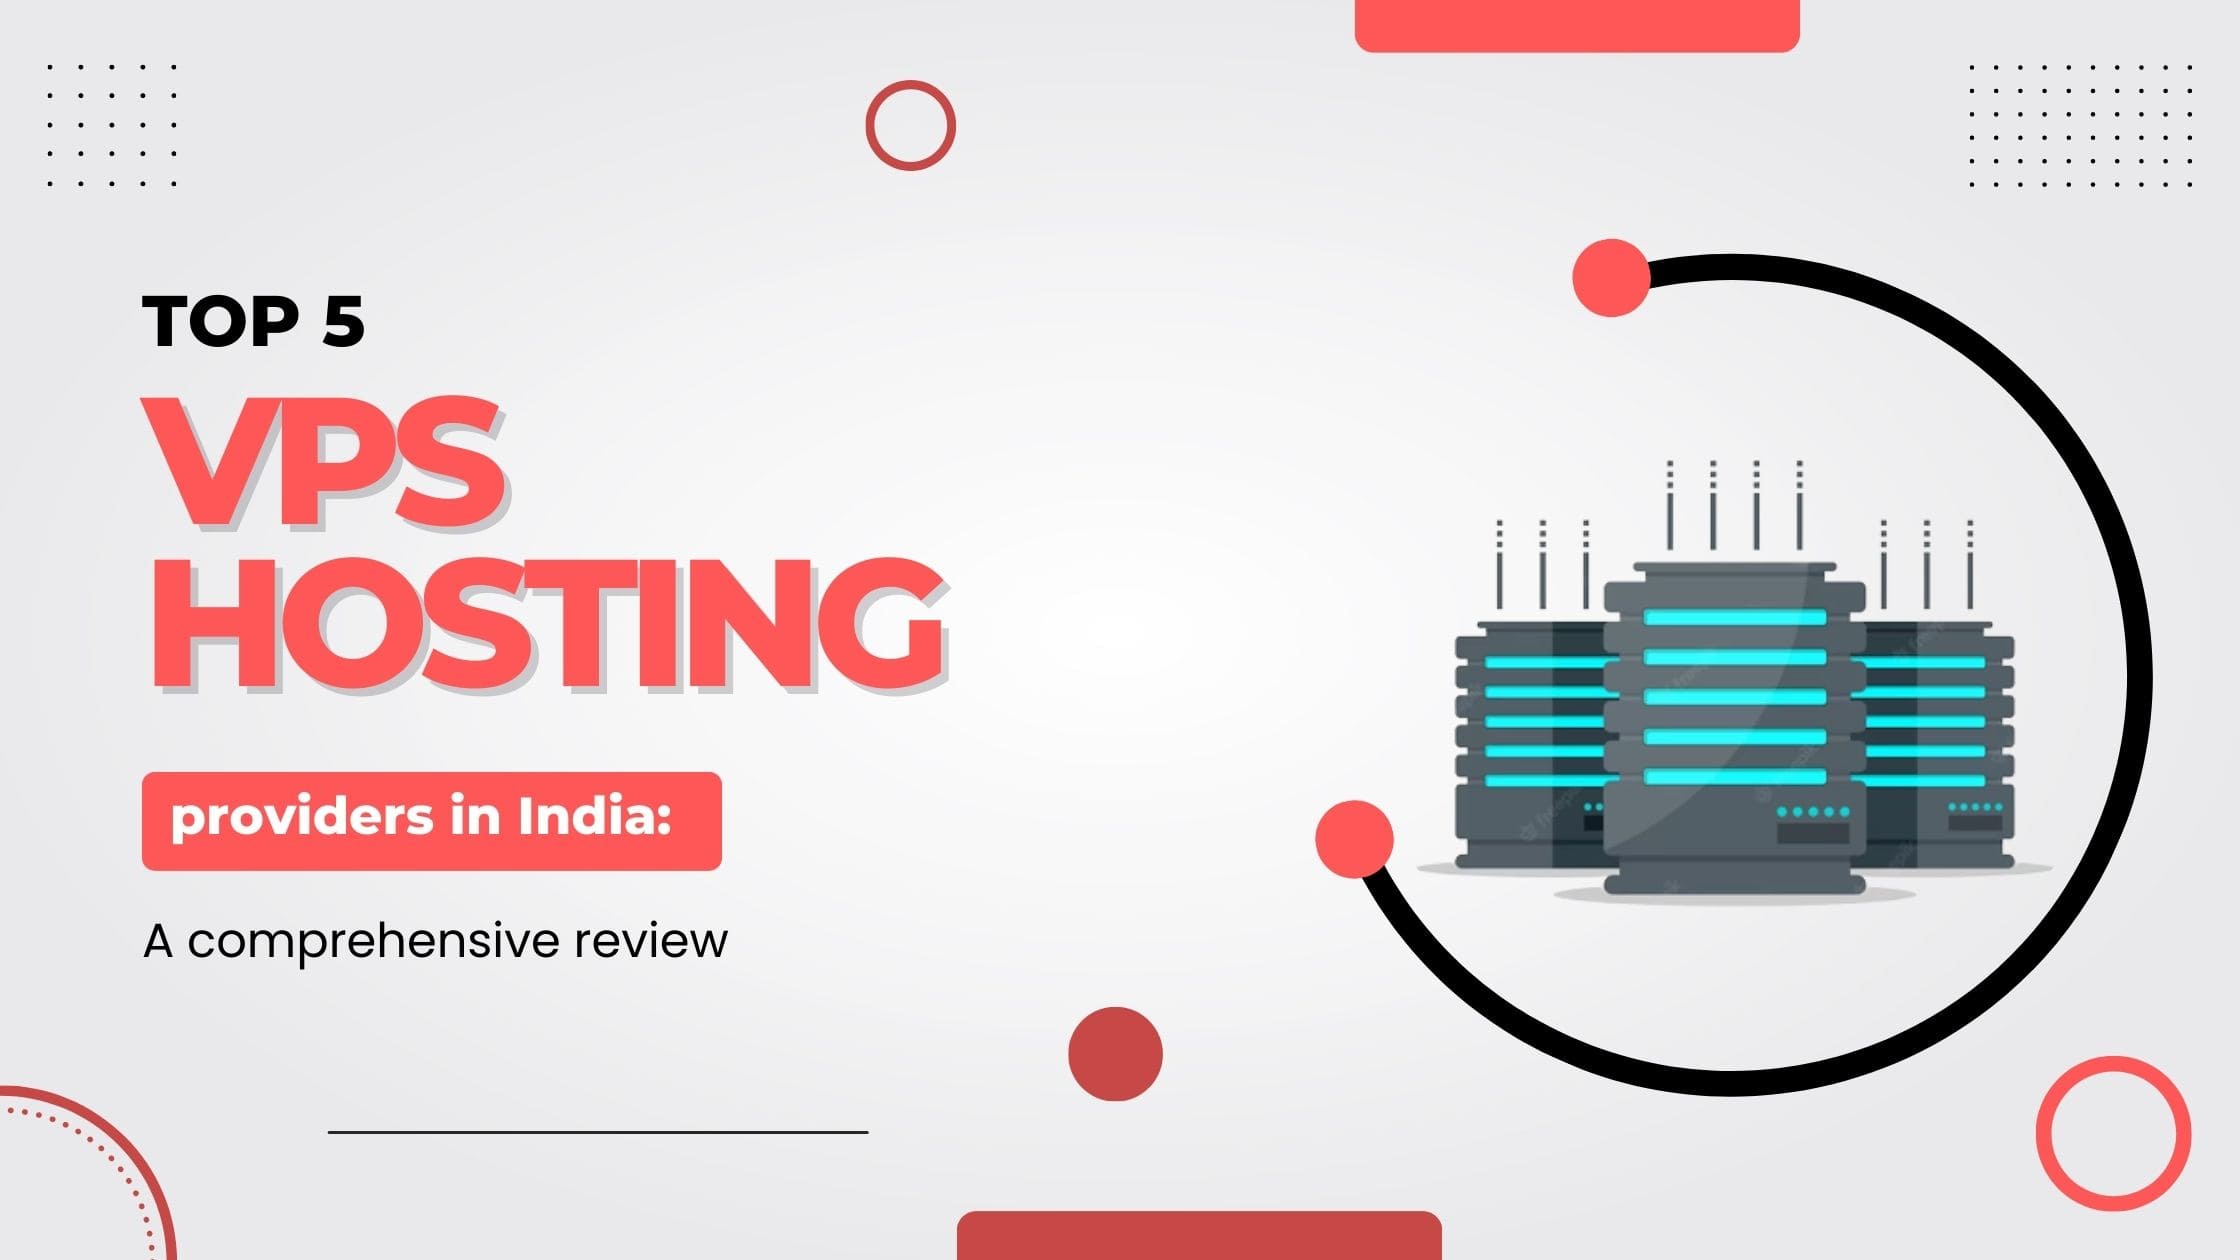 Top 5 VPS hosting providers in India A comprehensive review